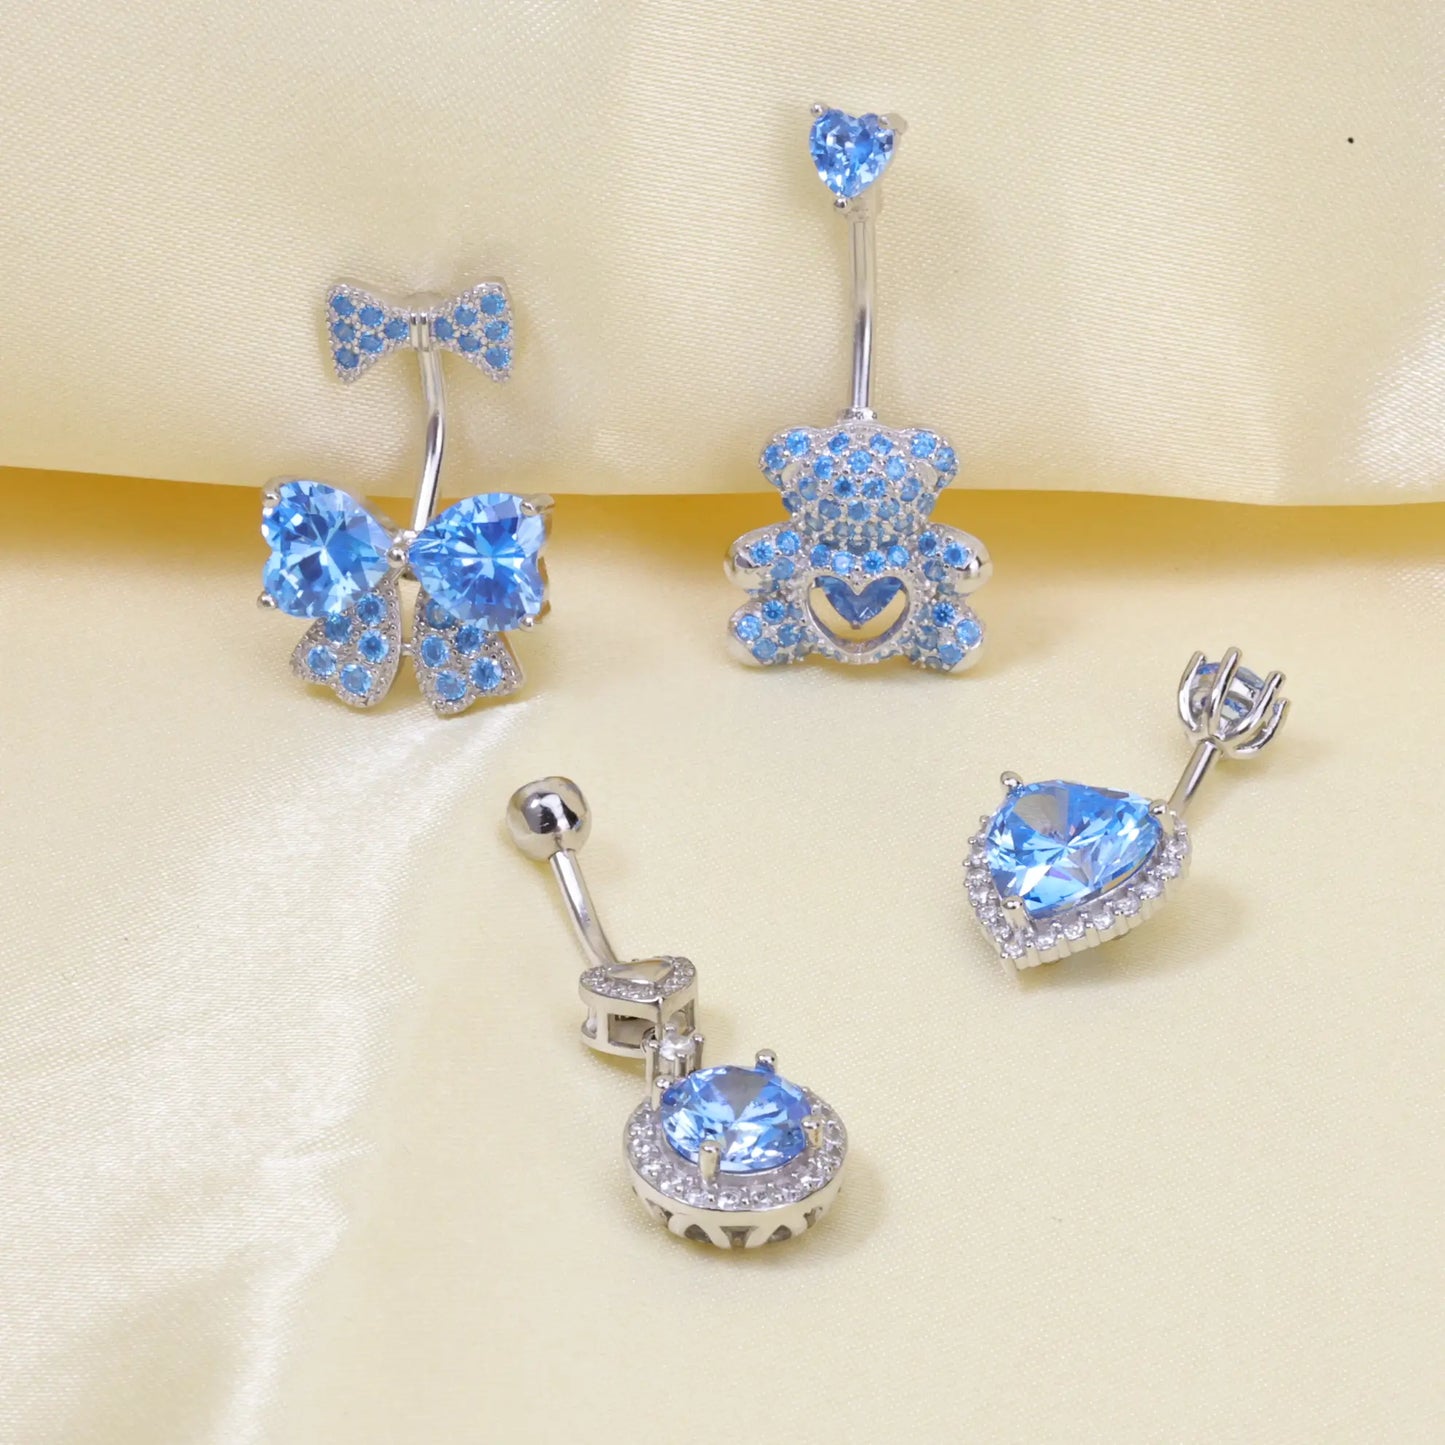 Blue Teddy Bear Belly Button Ring (With Dangling Heart)